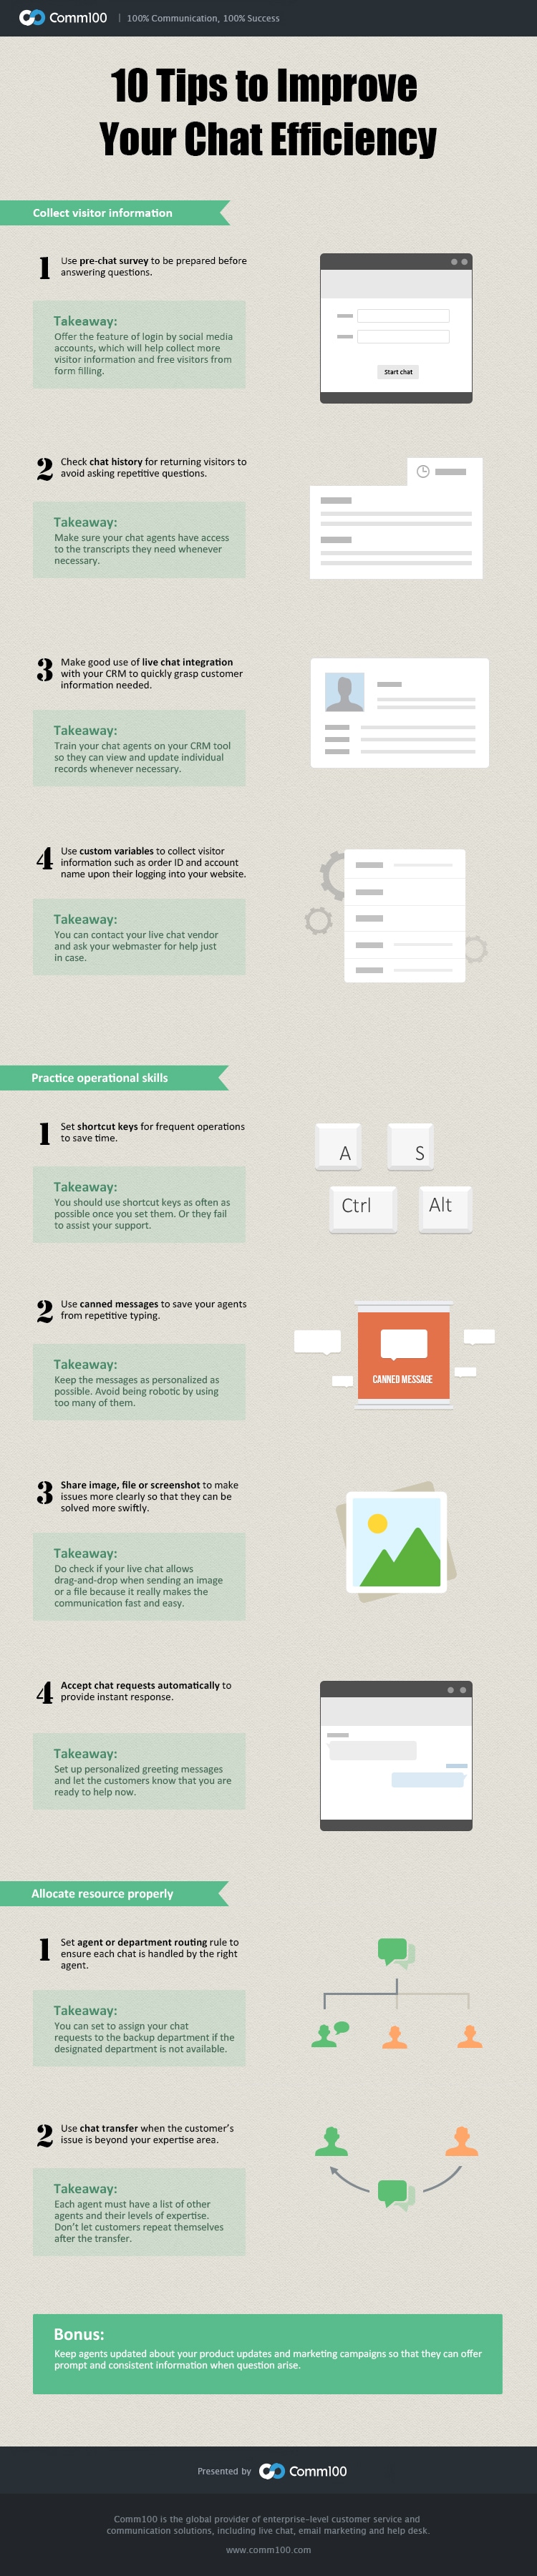 Infographic: 10 Tips to Improve Your Live Chat Efficiency